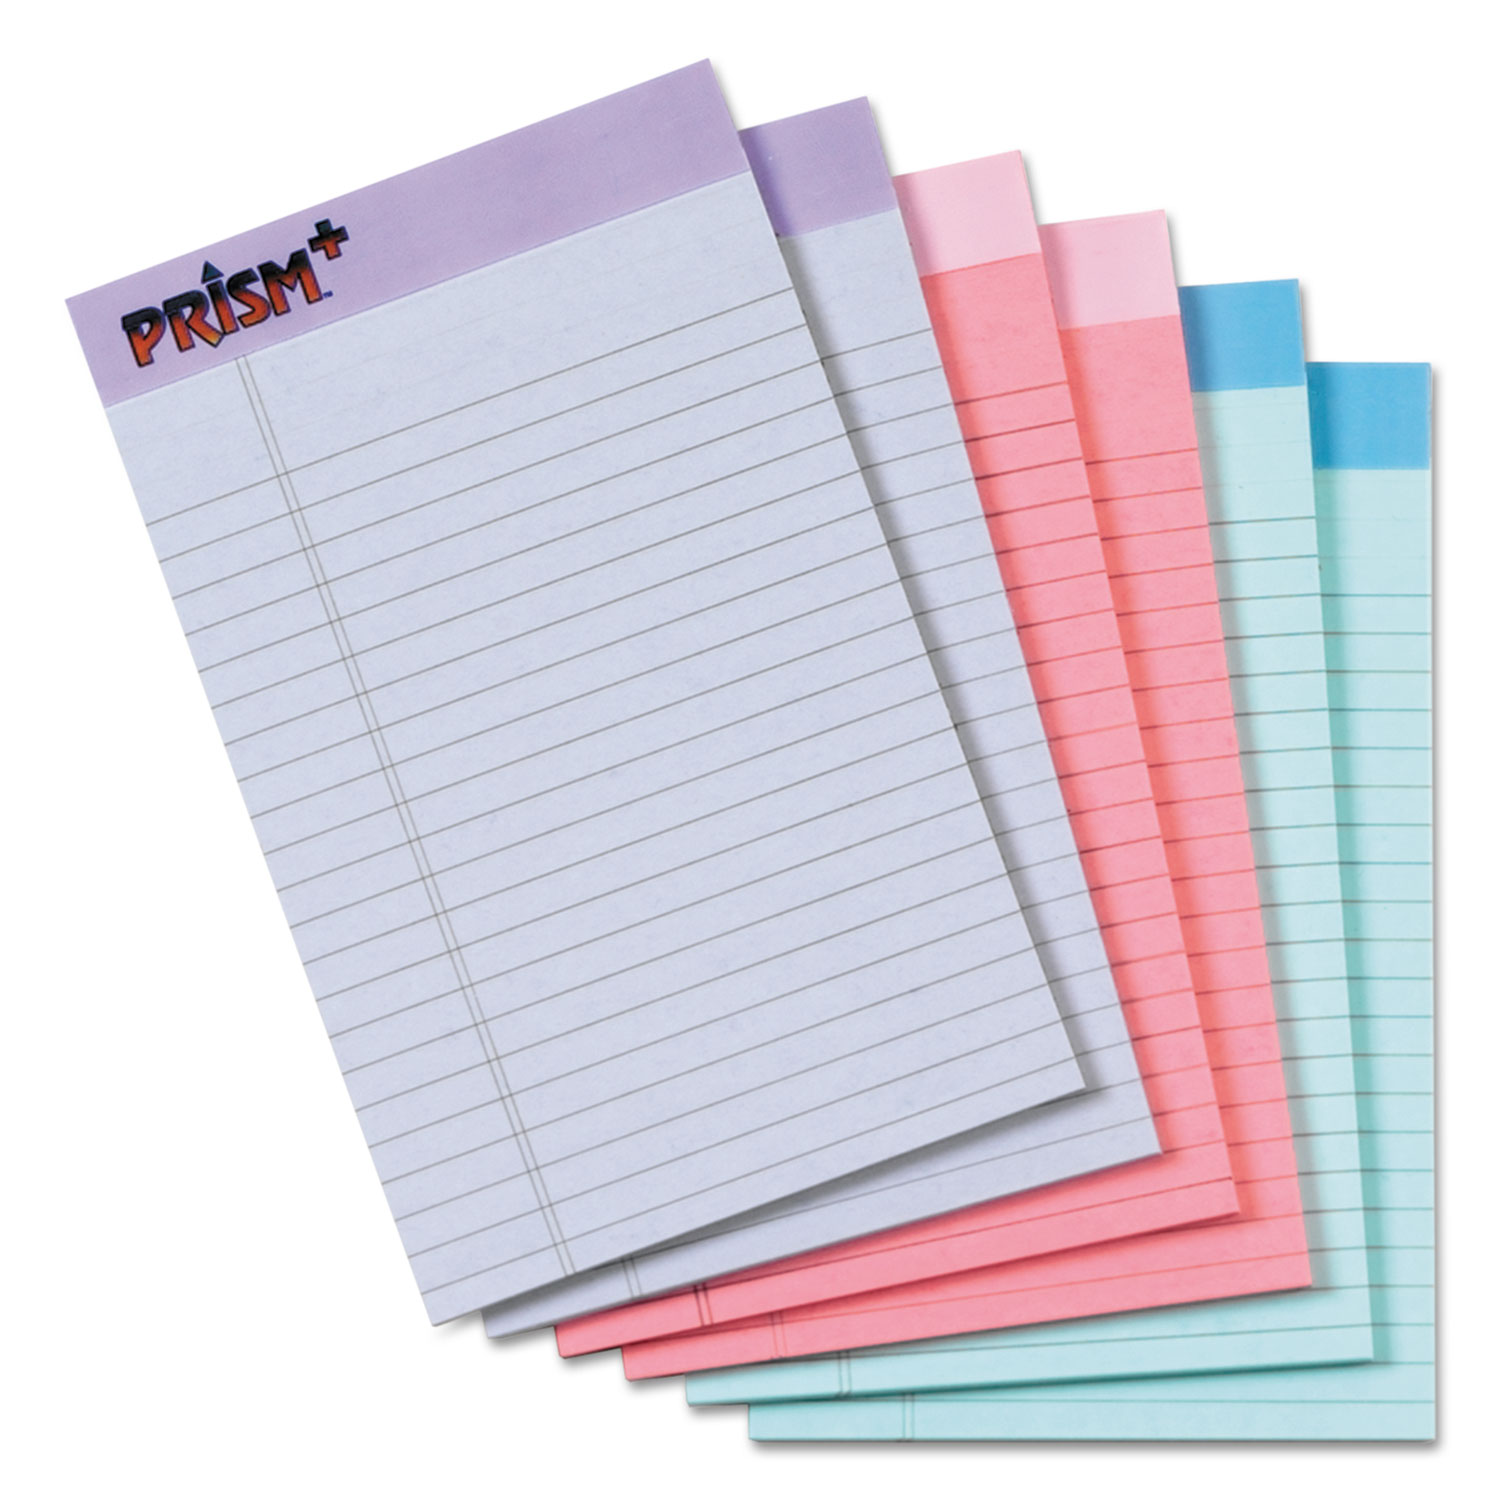  TOPS 63016 Prism + Writing Pads, Narrow Rule, 5 x 8, Assorted Pastel Sheet Colors, 50 Sheets, 6/Pack (TOP63016) 